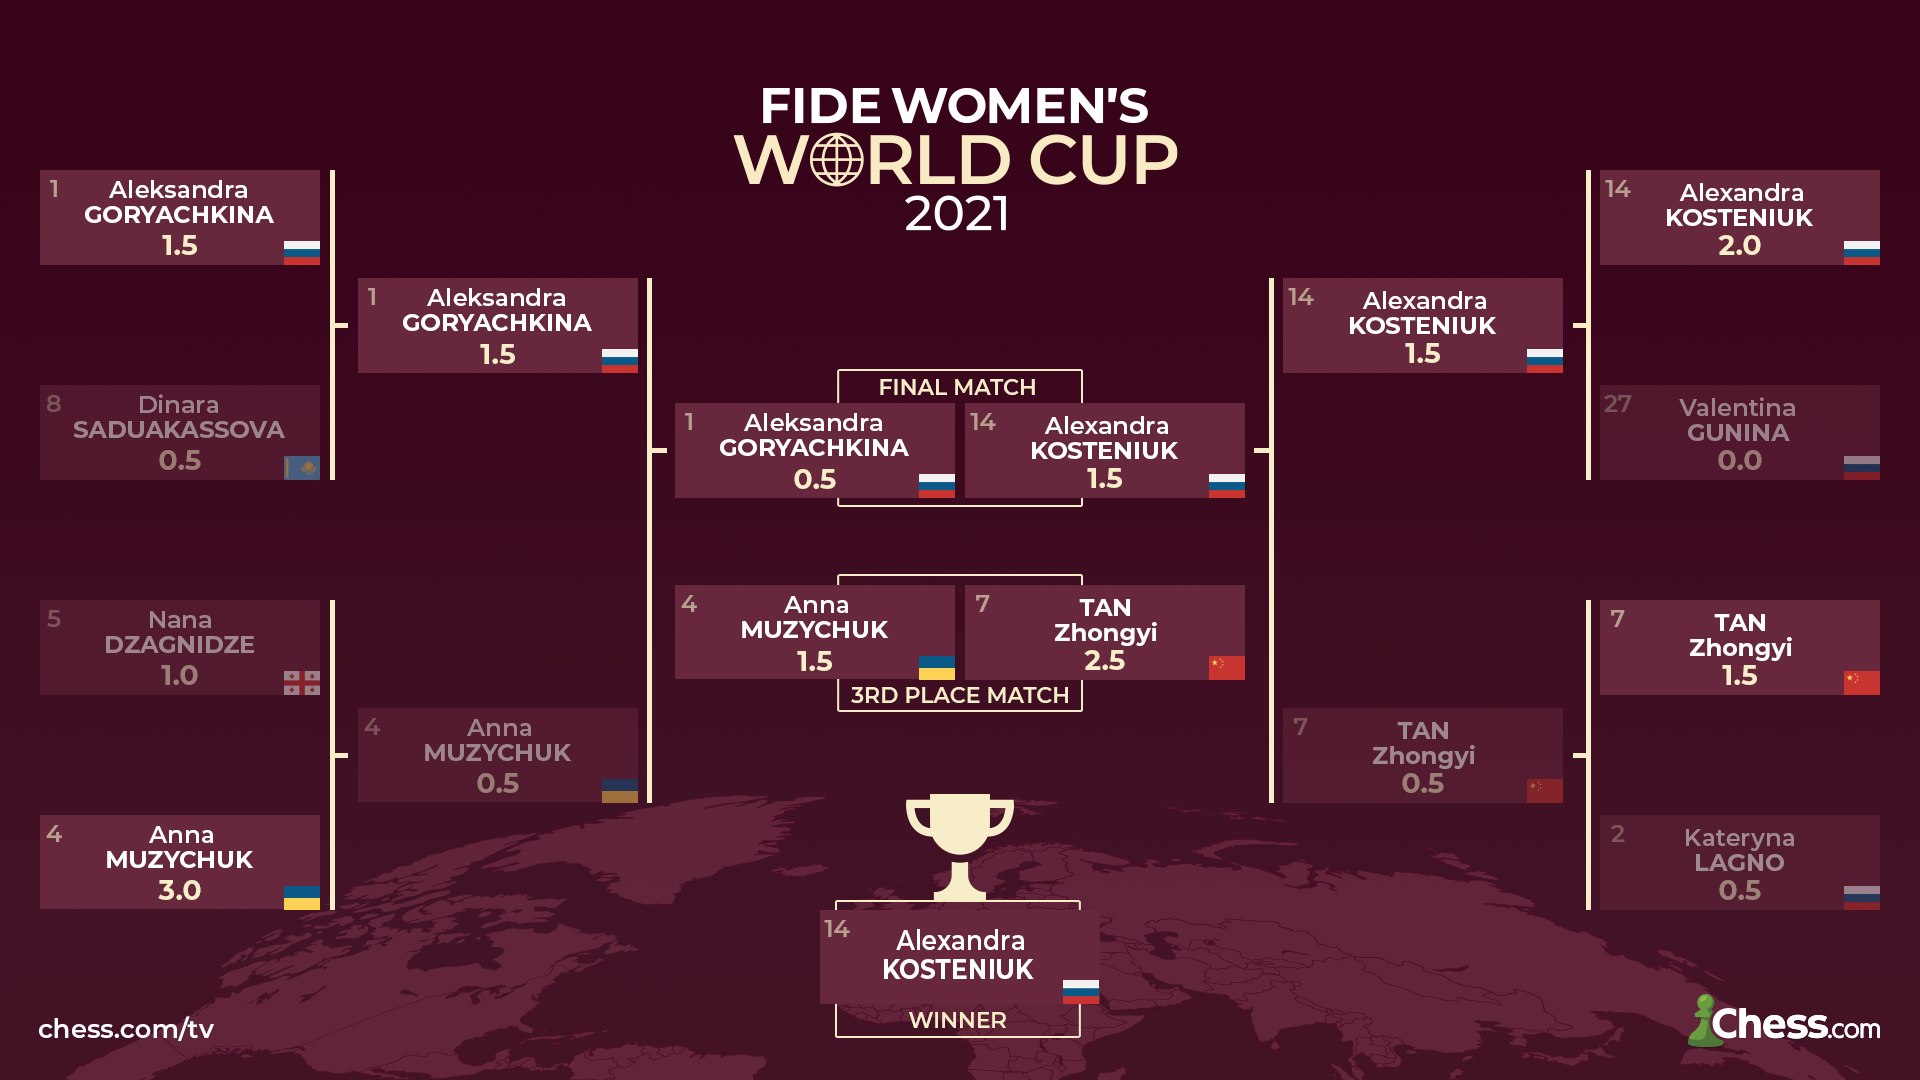 2021 FIDE World Cup All The Information